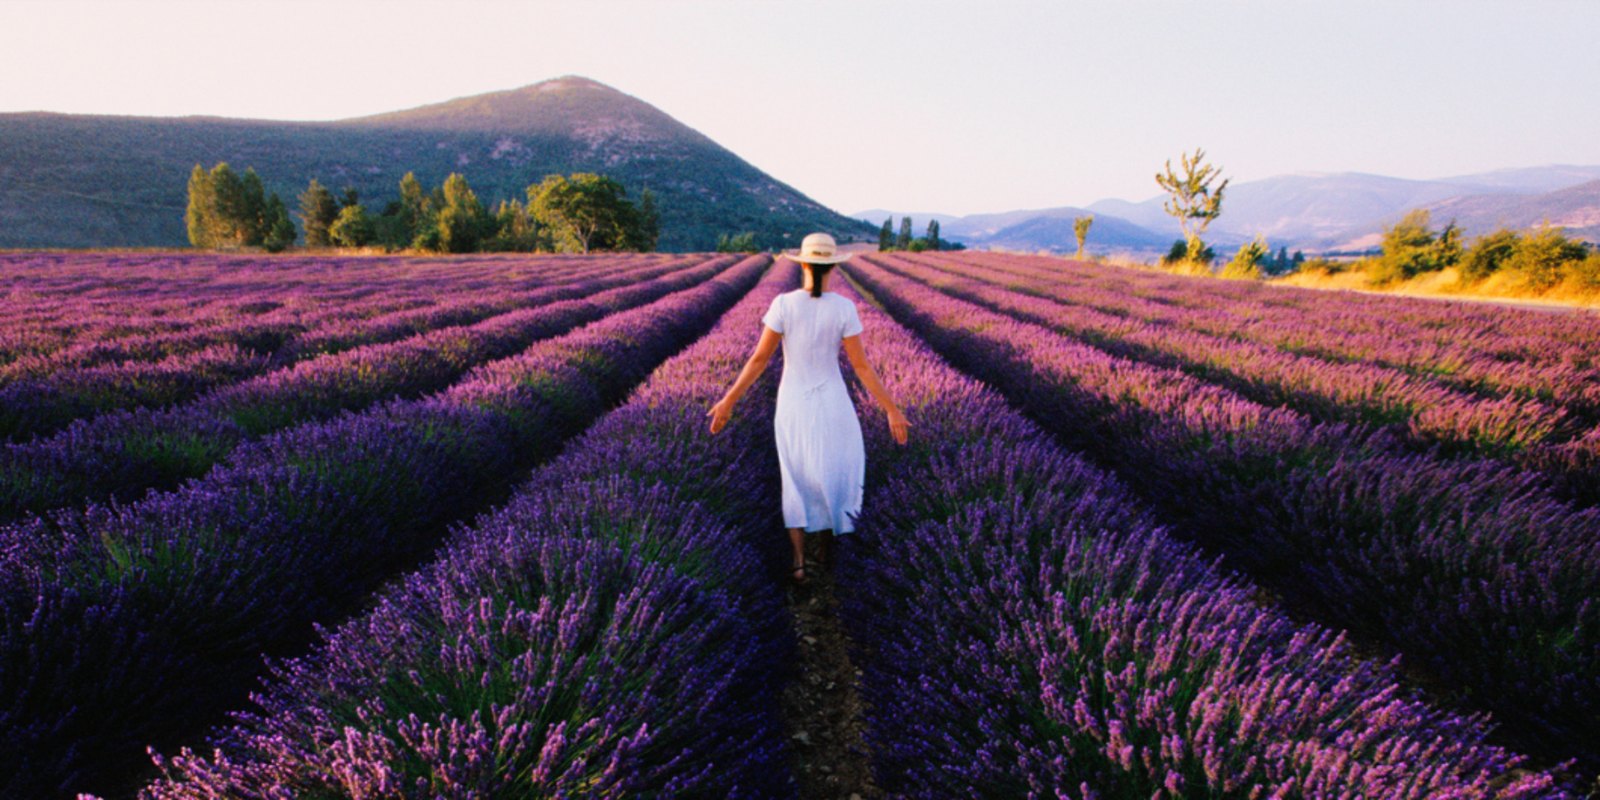 A lady wearing white walking through a lavender field in France